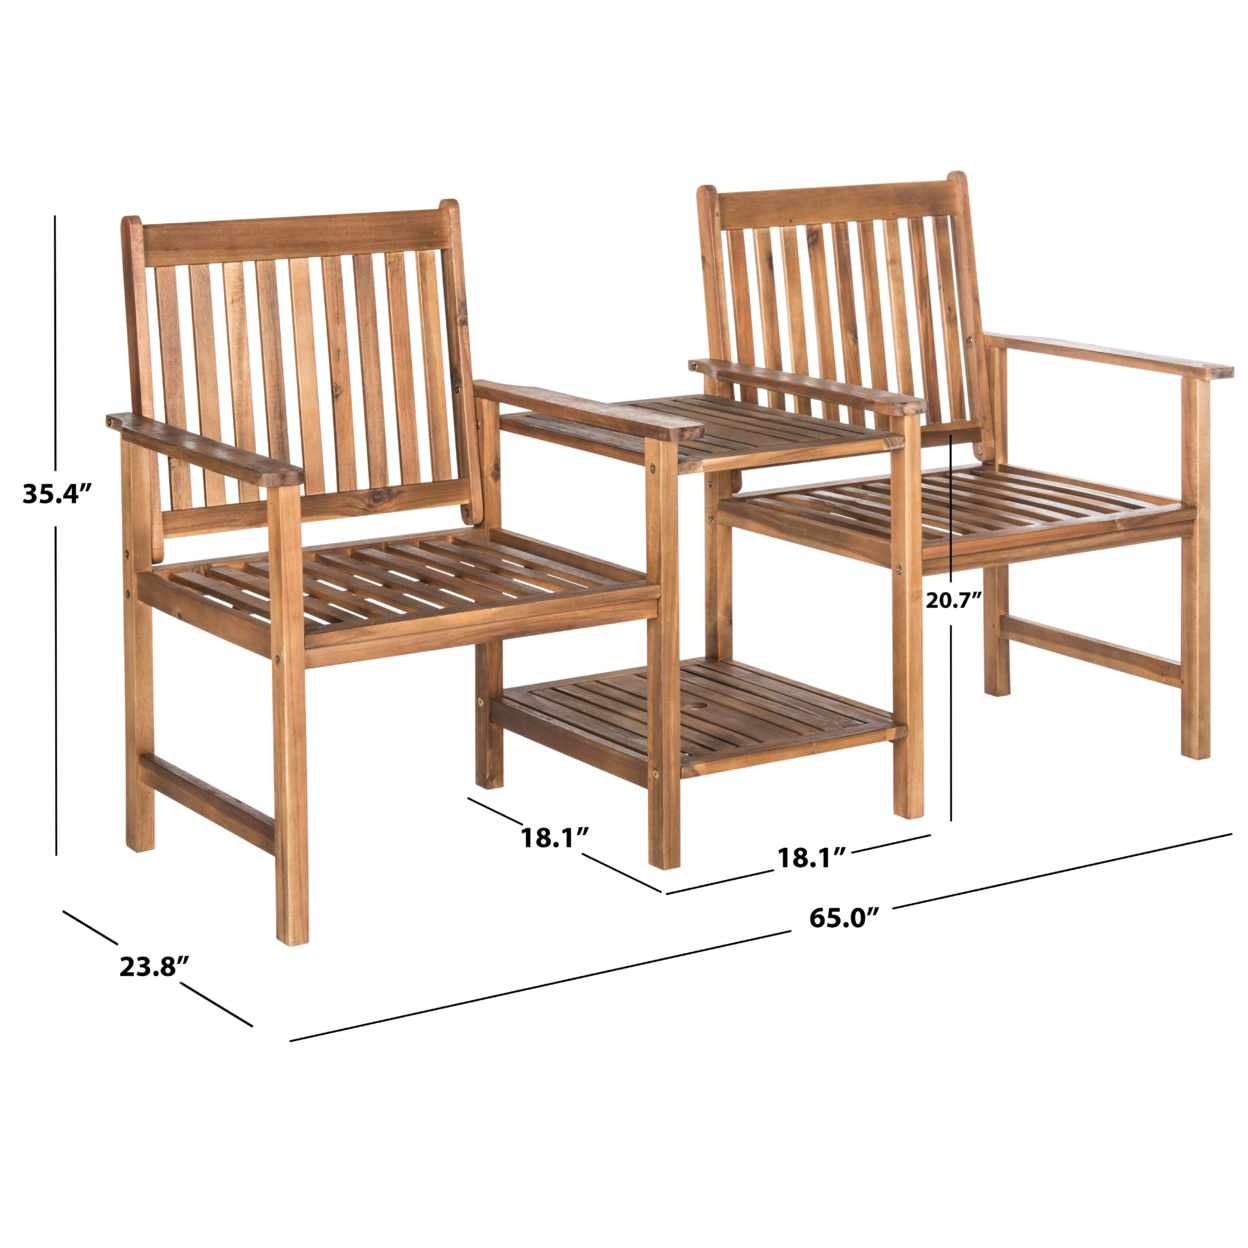 SAFAVIEH Outdoor Collection Brea Twin Seat Bench Natural